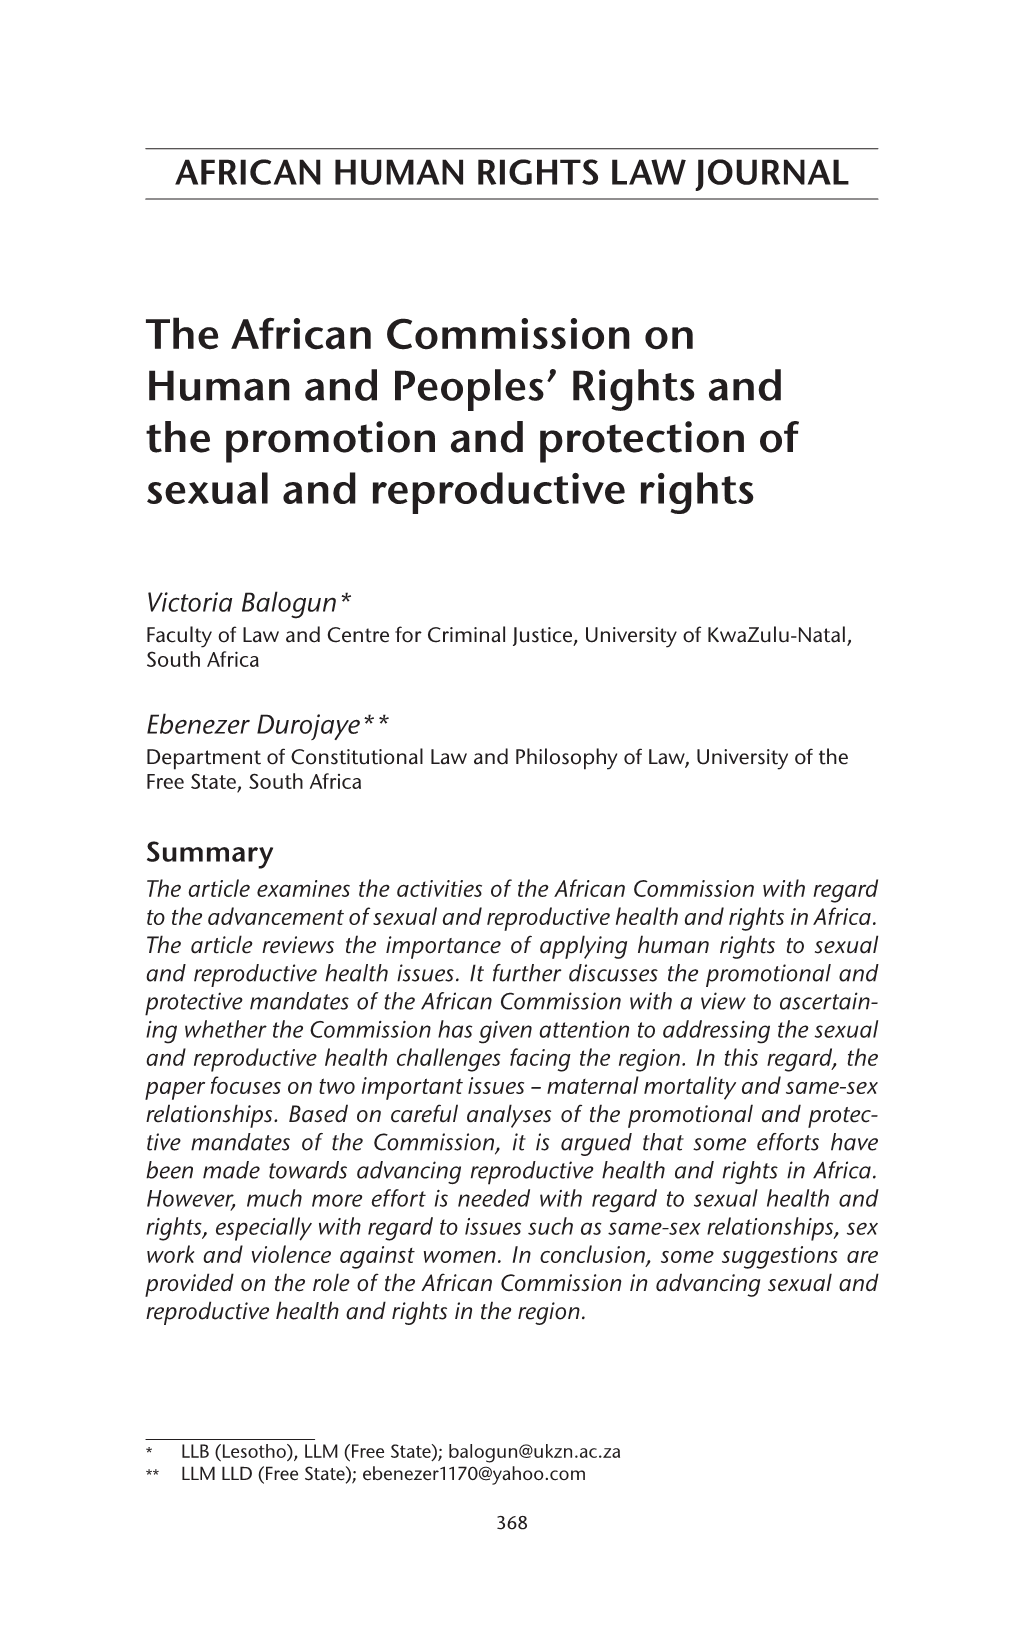 The African Commission on Human and Peoples' Rights and The